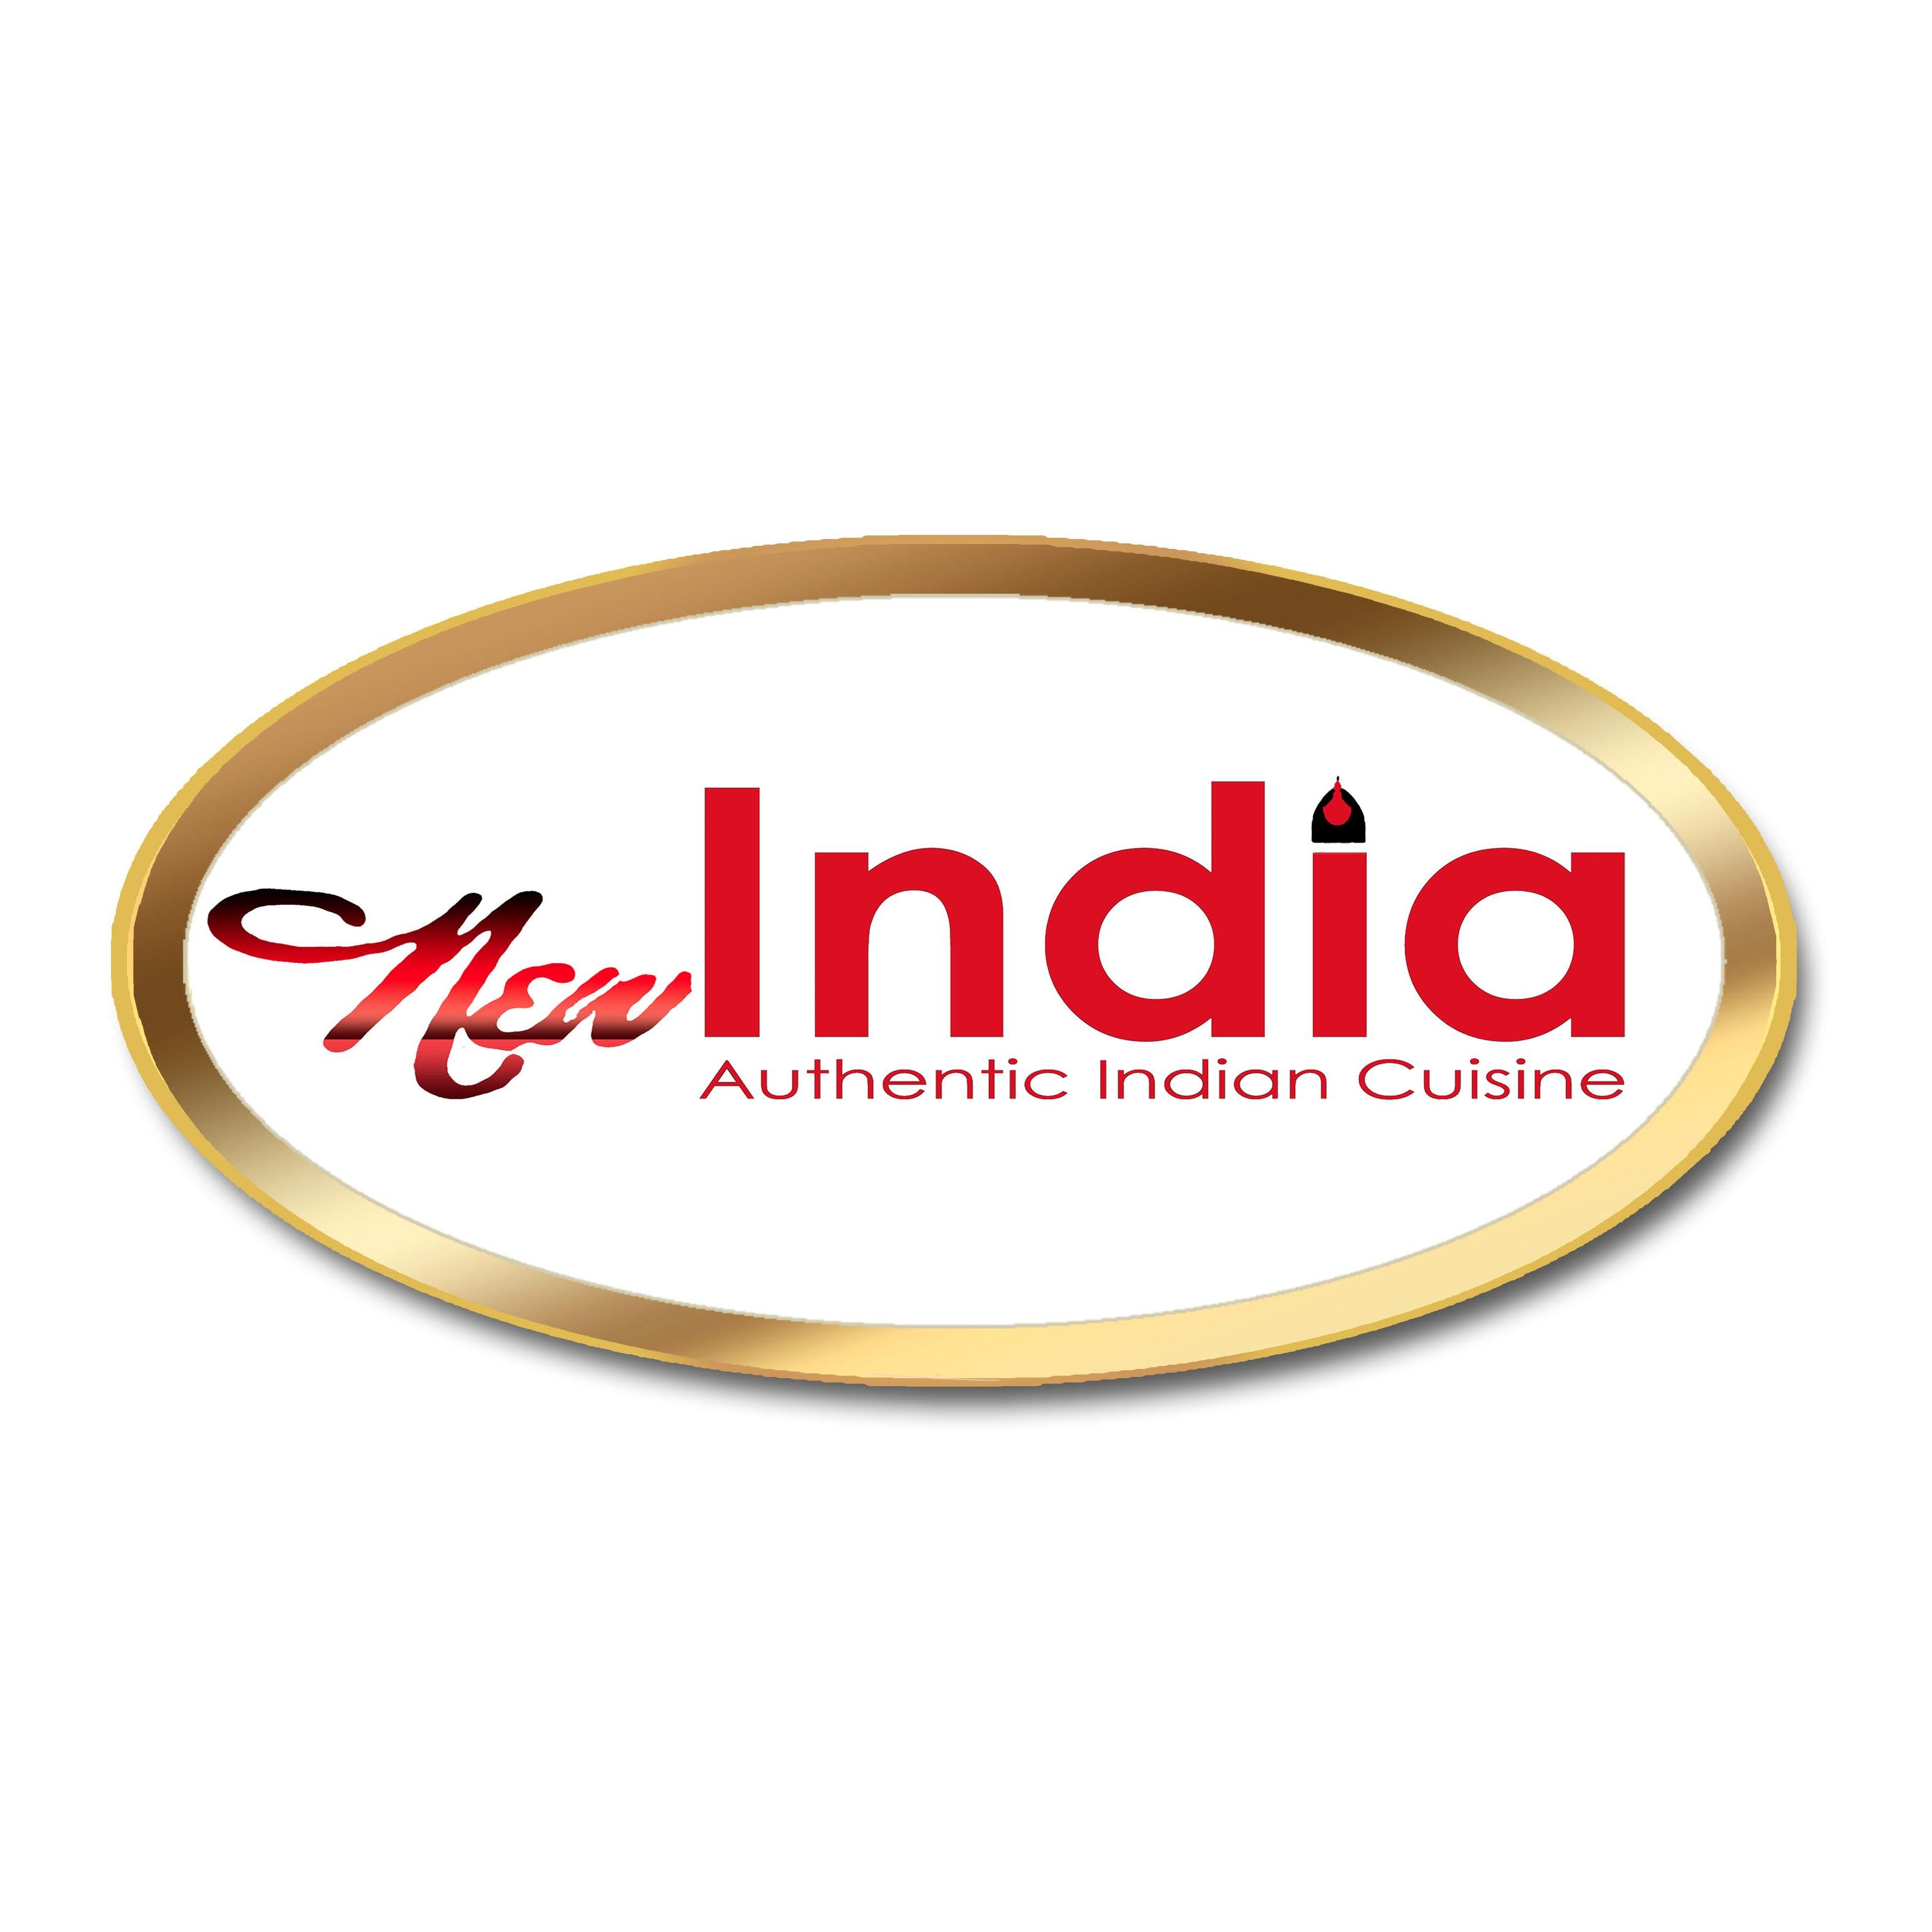 New India Restaurant is located at the heart of the Adelaide CBD, and has been offering loyal patrons a authentic culinary journey for the many years.